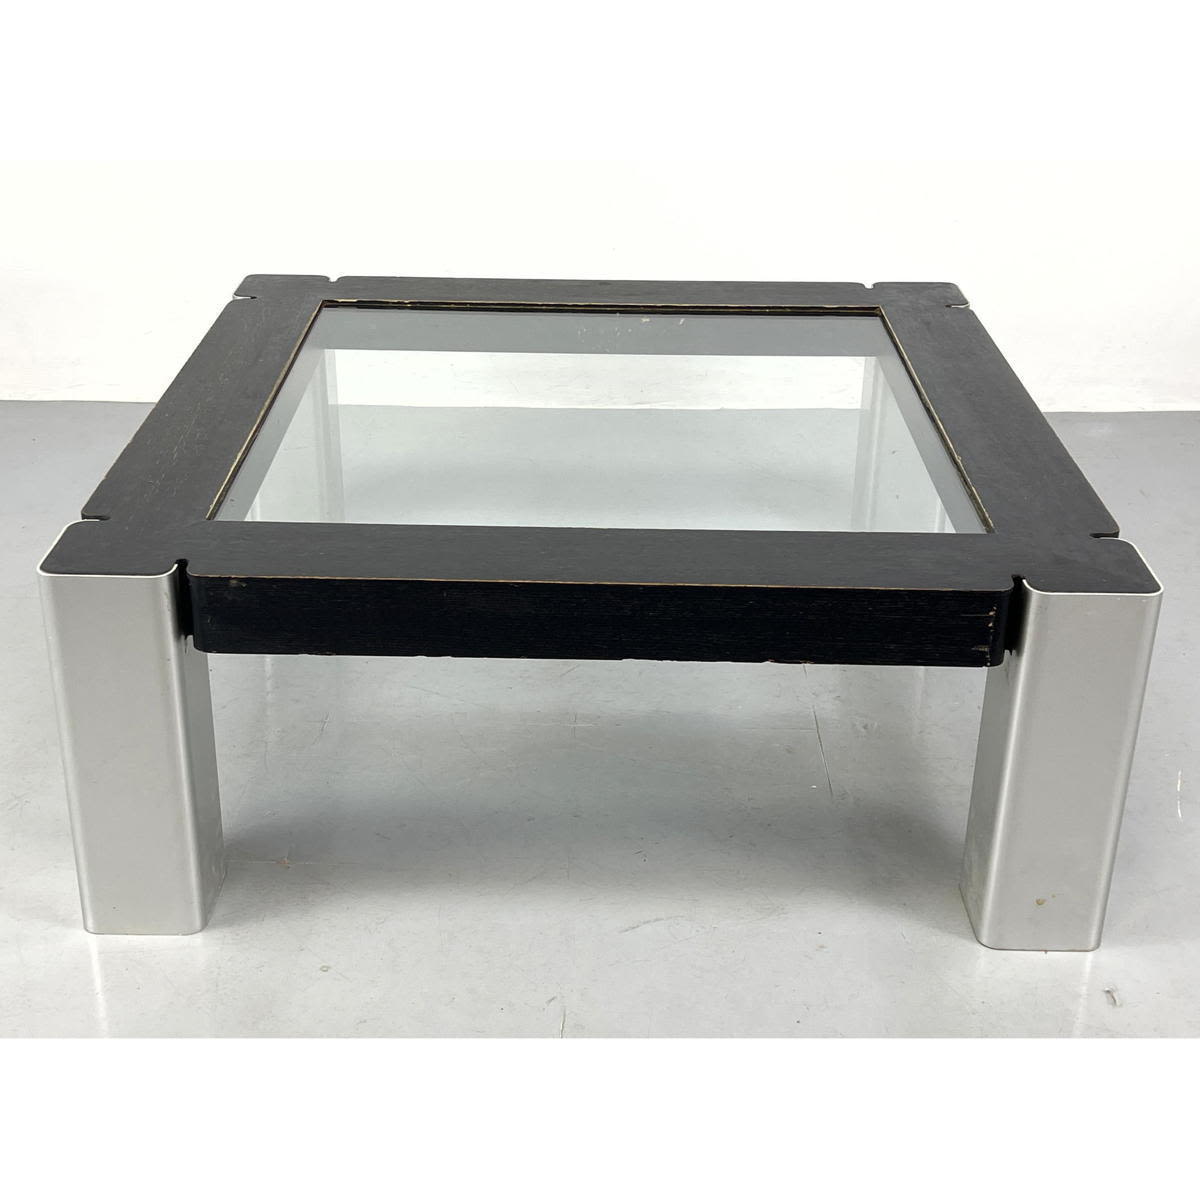 Square Glass coffee table extruded